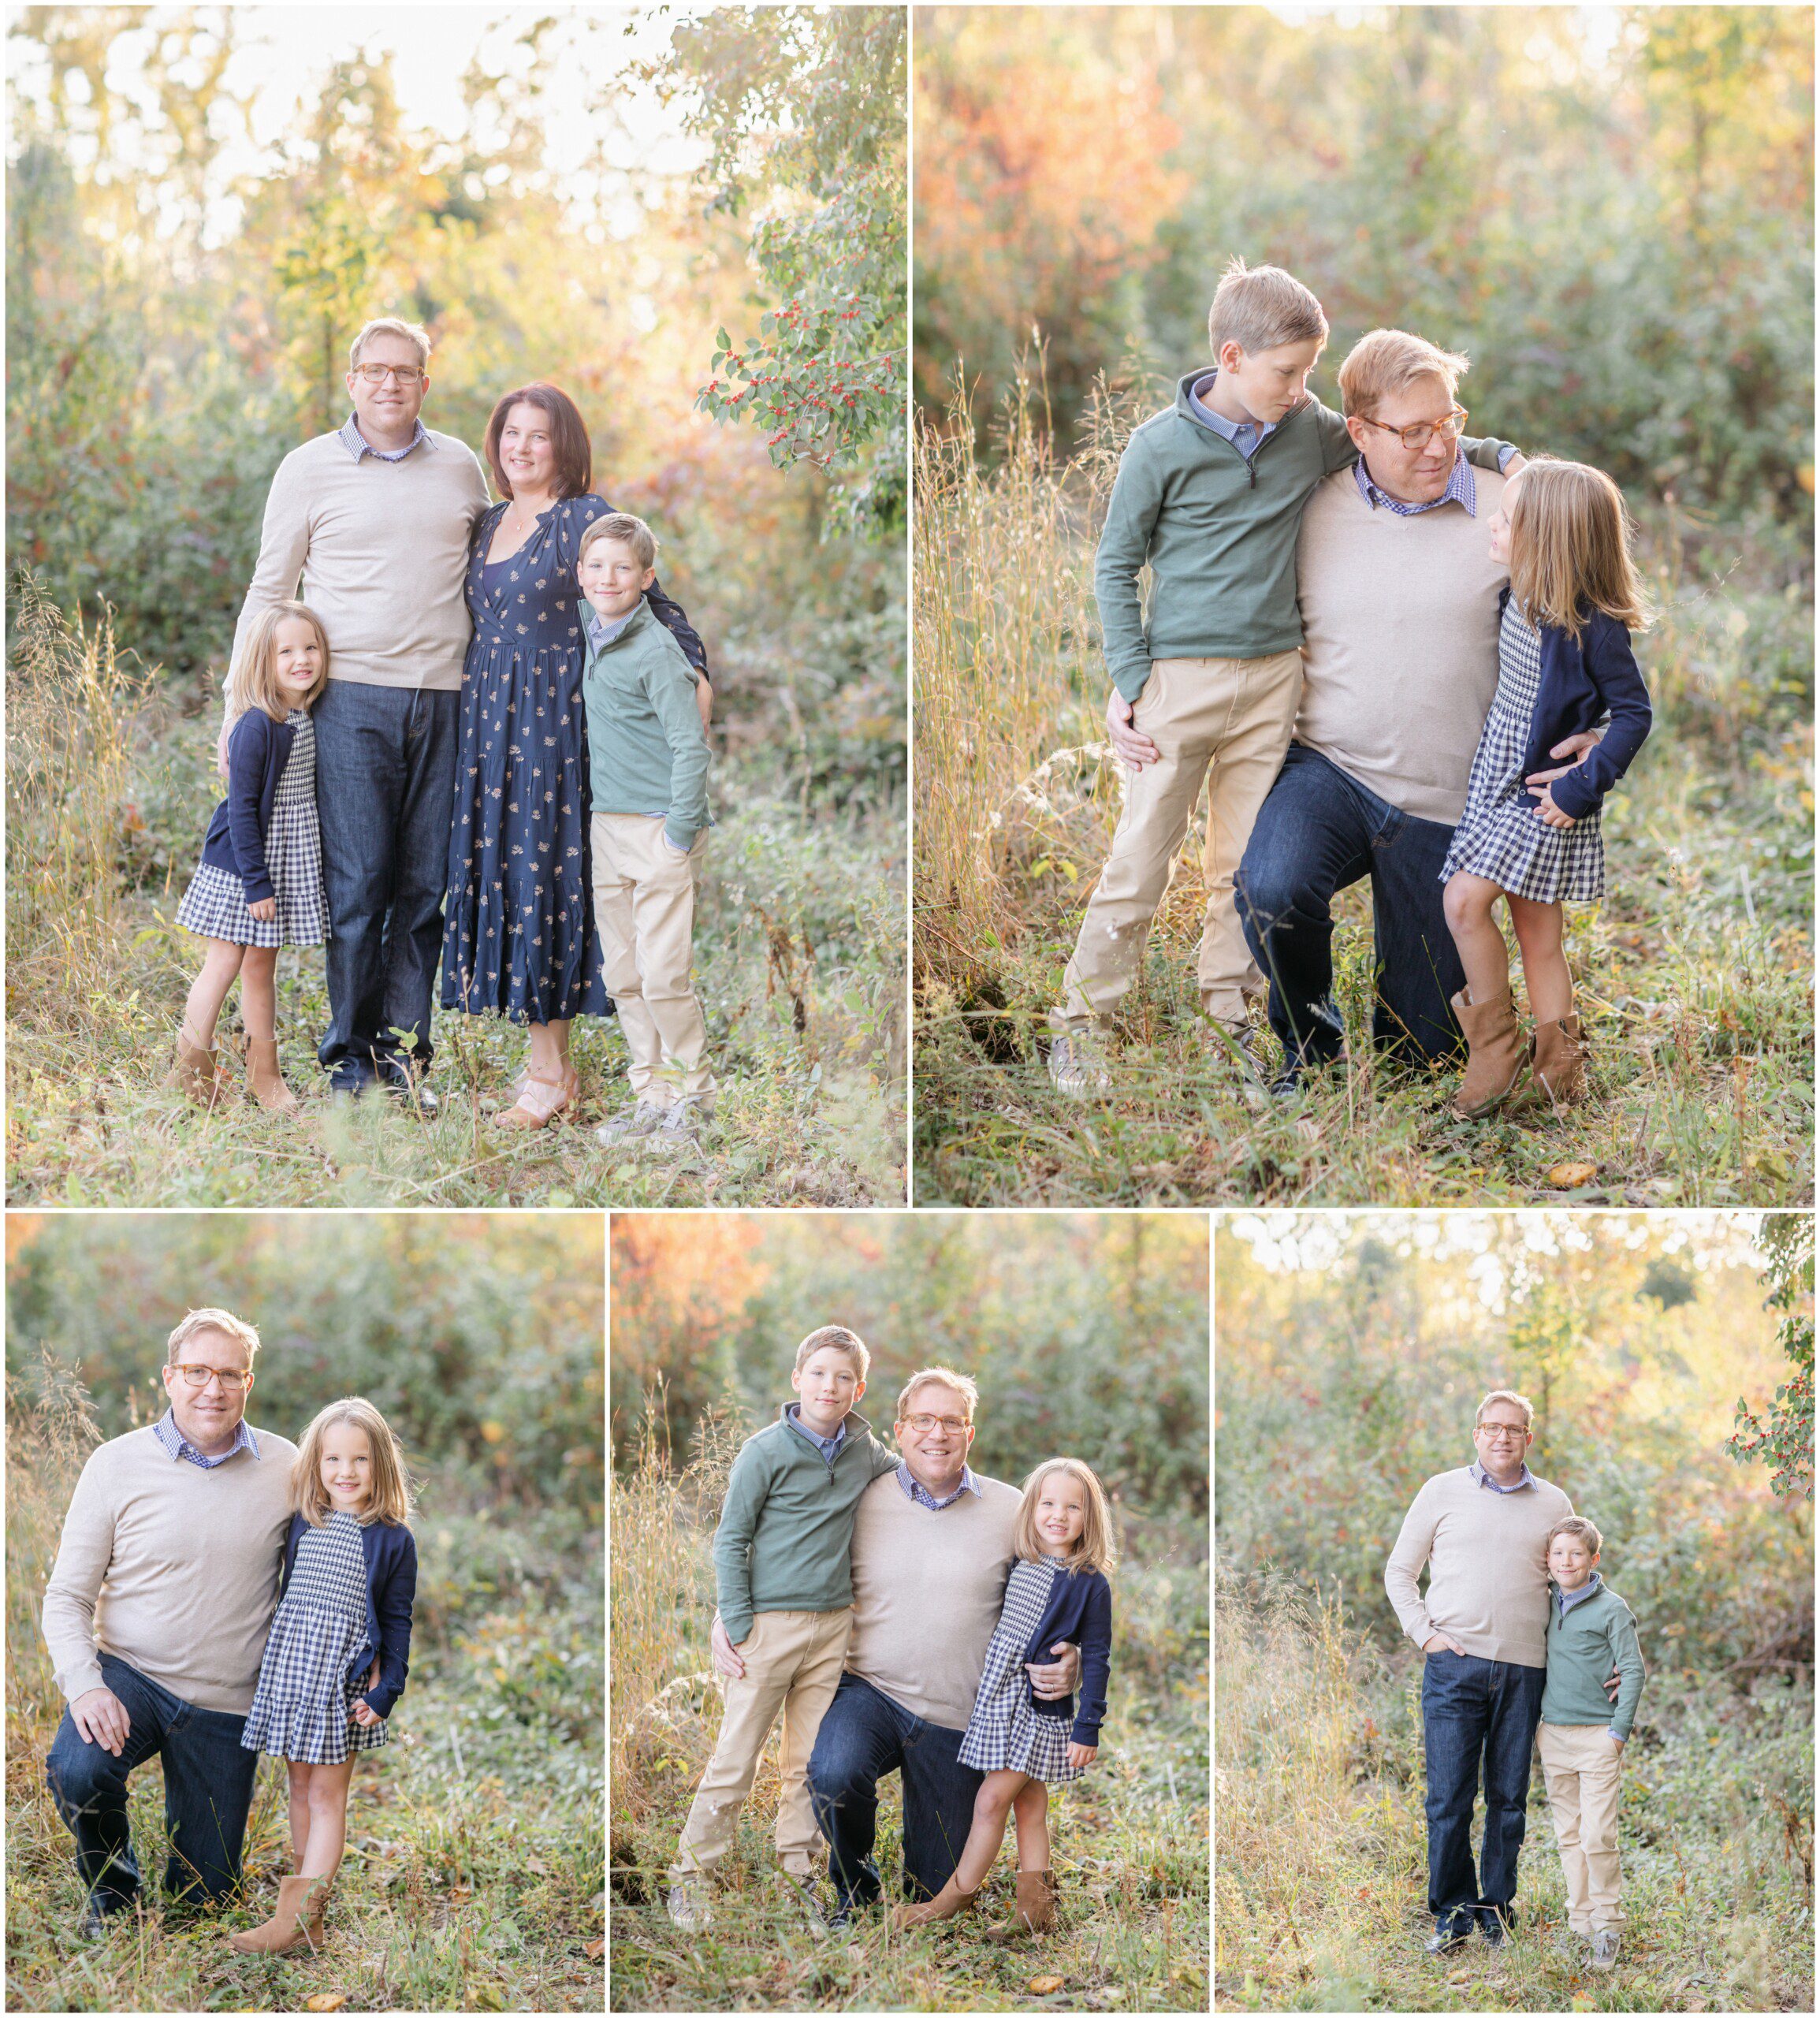 Outdoor Autumn family pictures in St. Louis